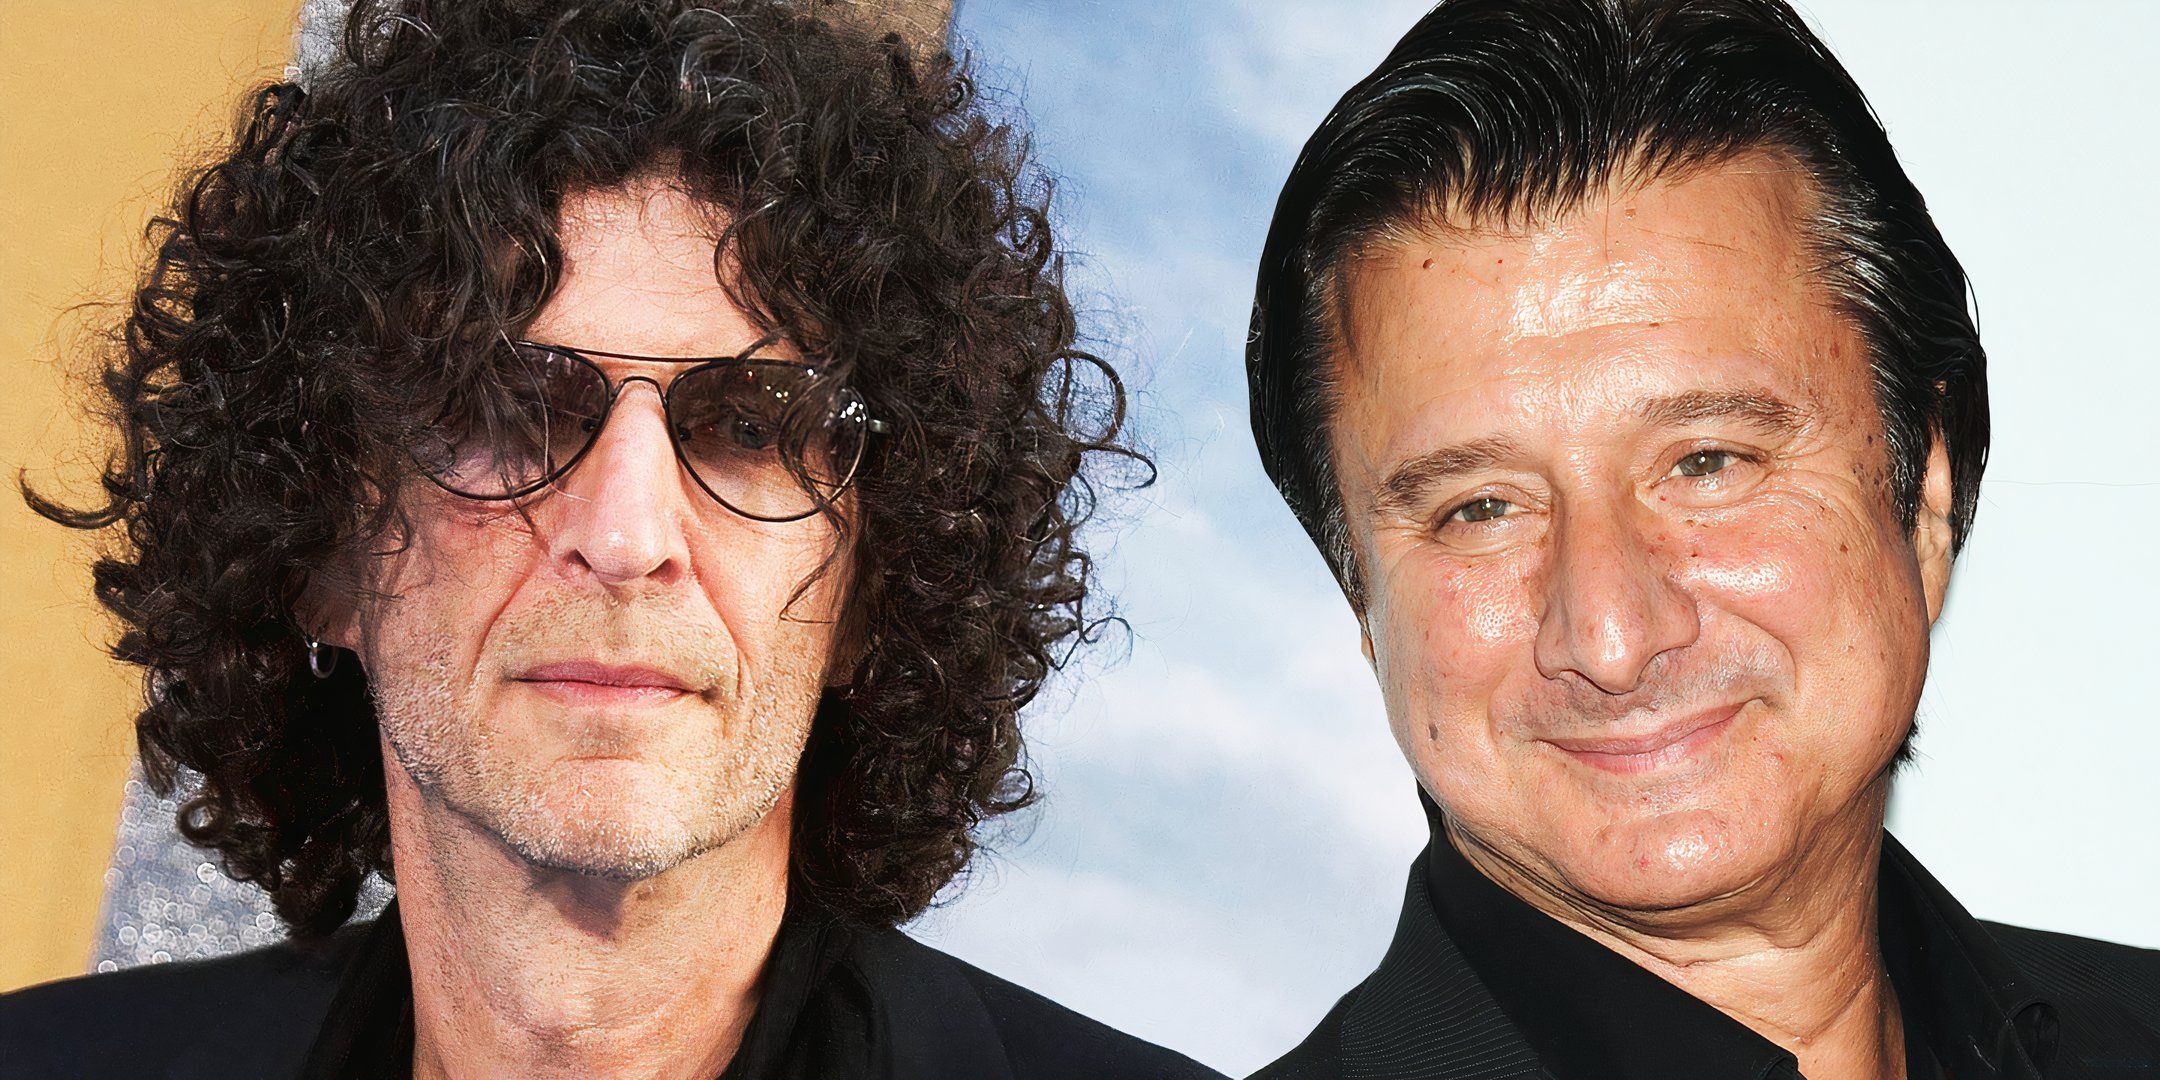 Howard Stern And Journey's Steve Perry feud